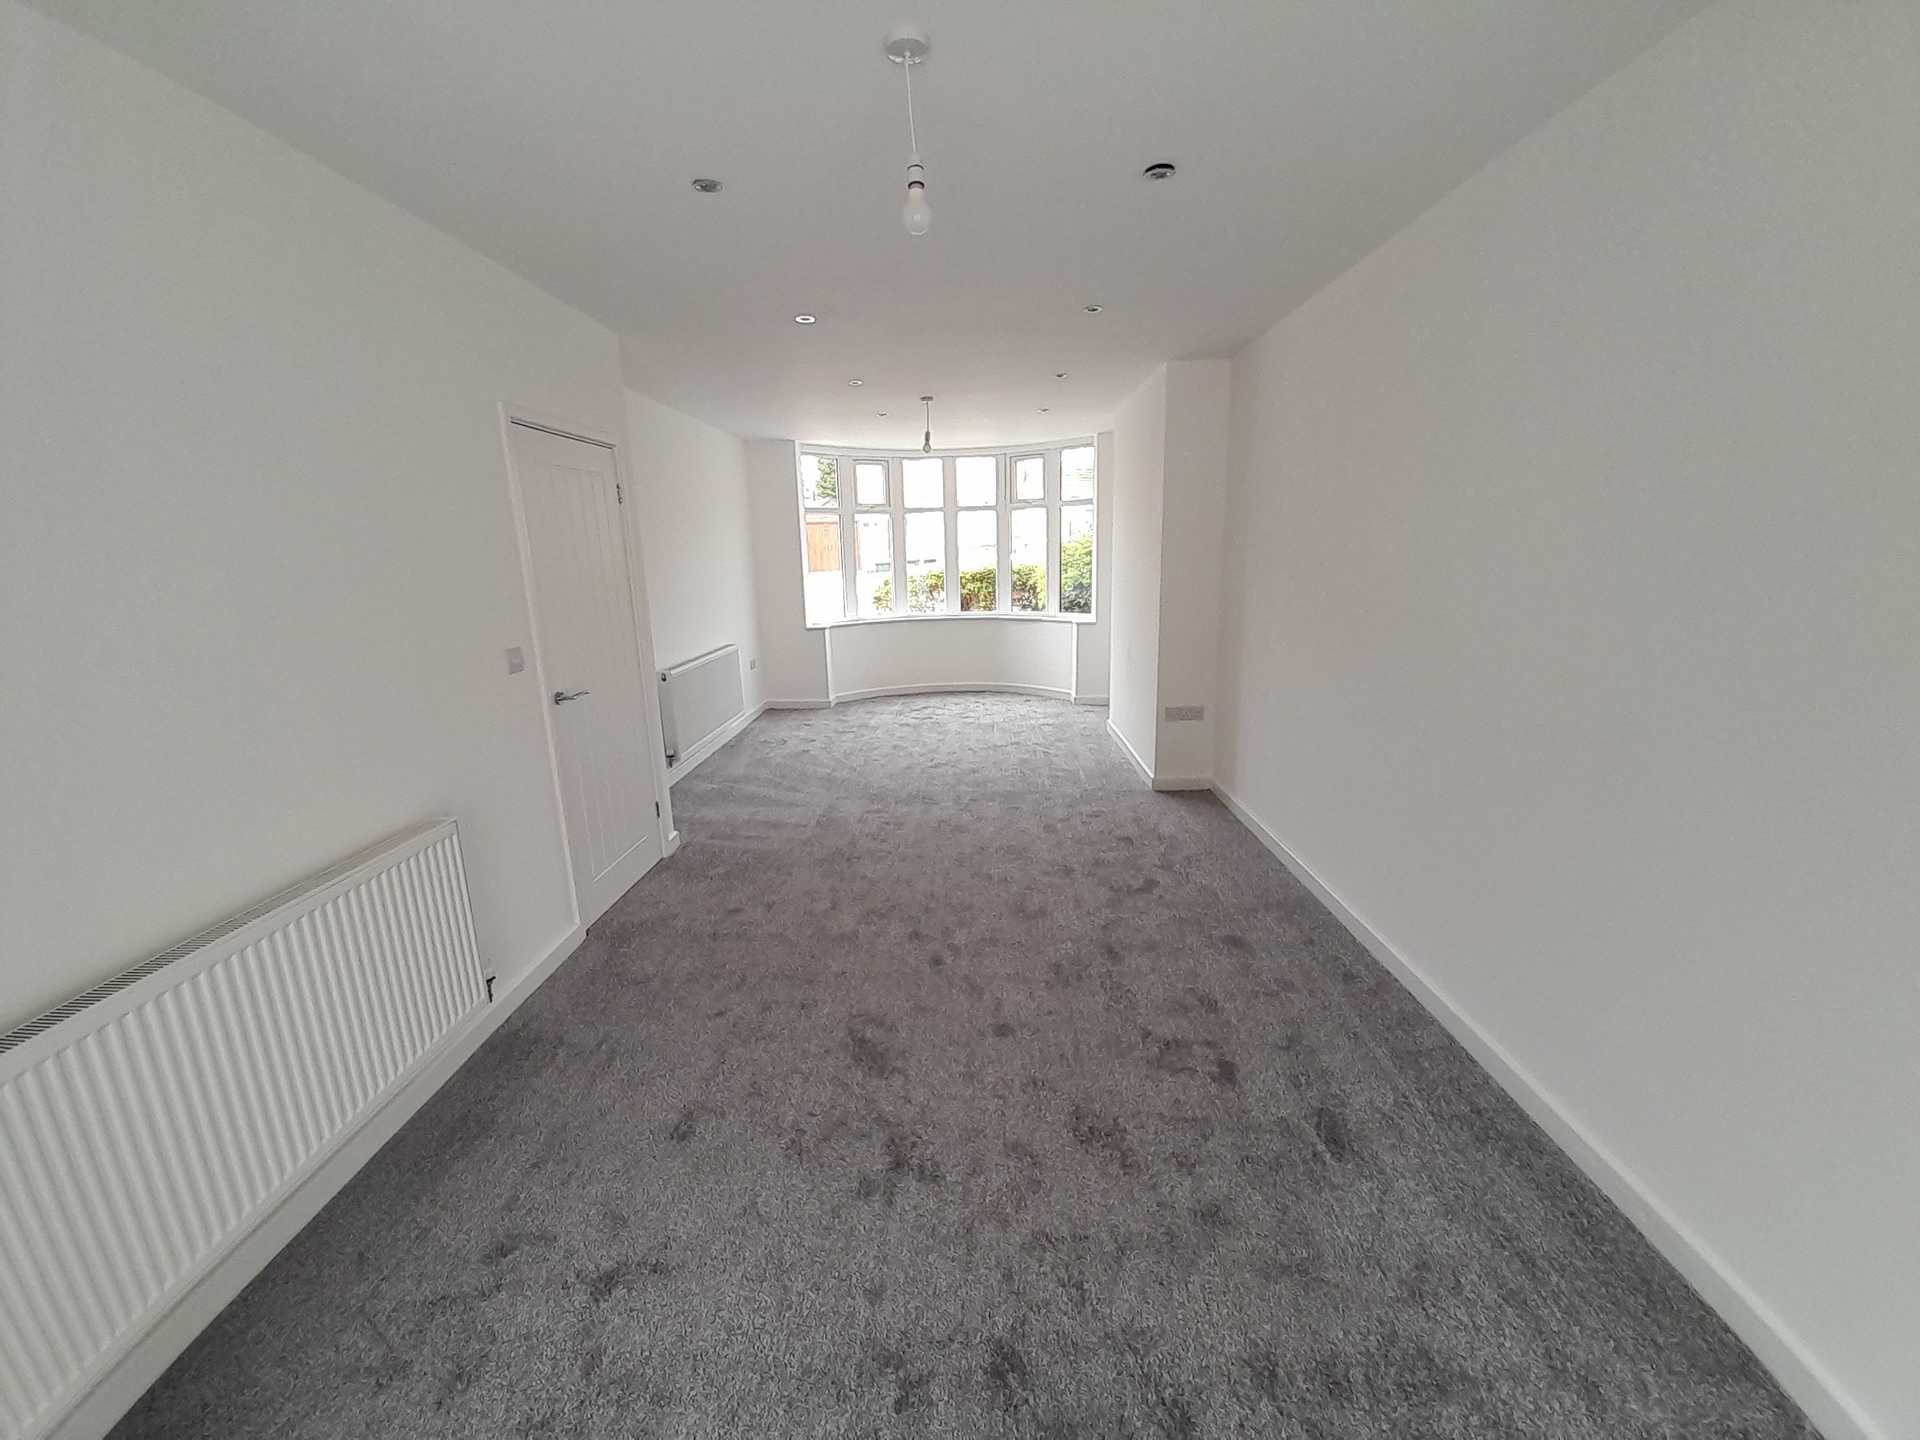 House in Birstall, Leicester 11798639